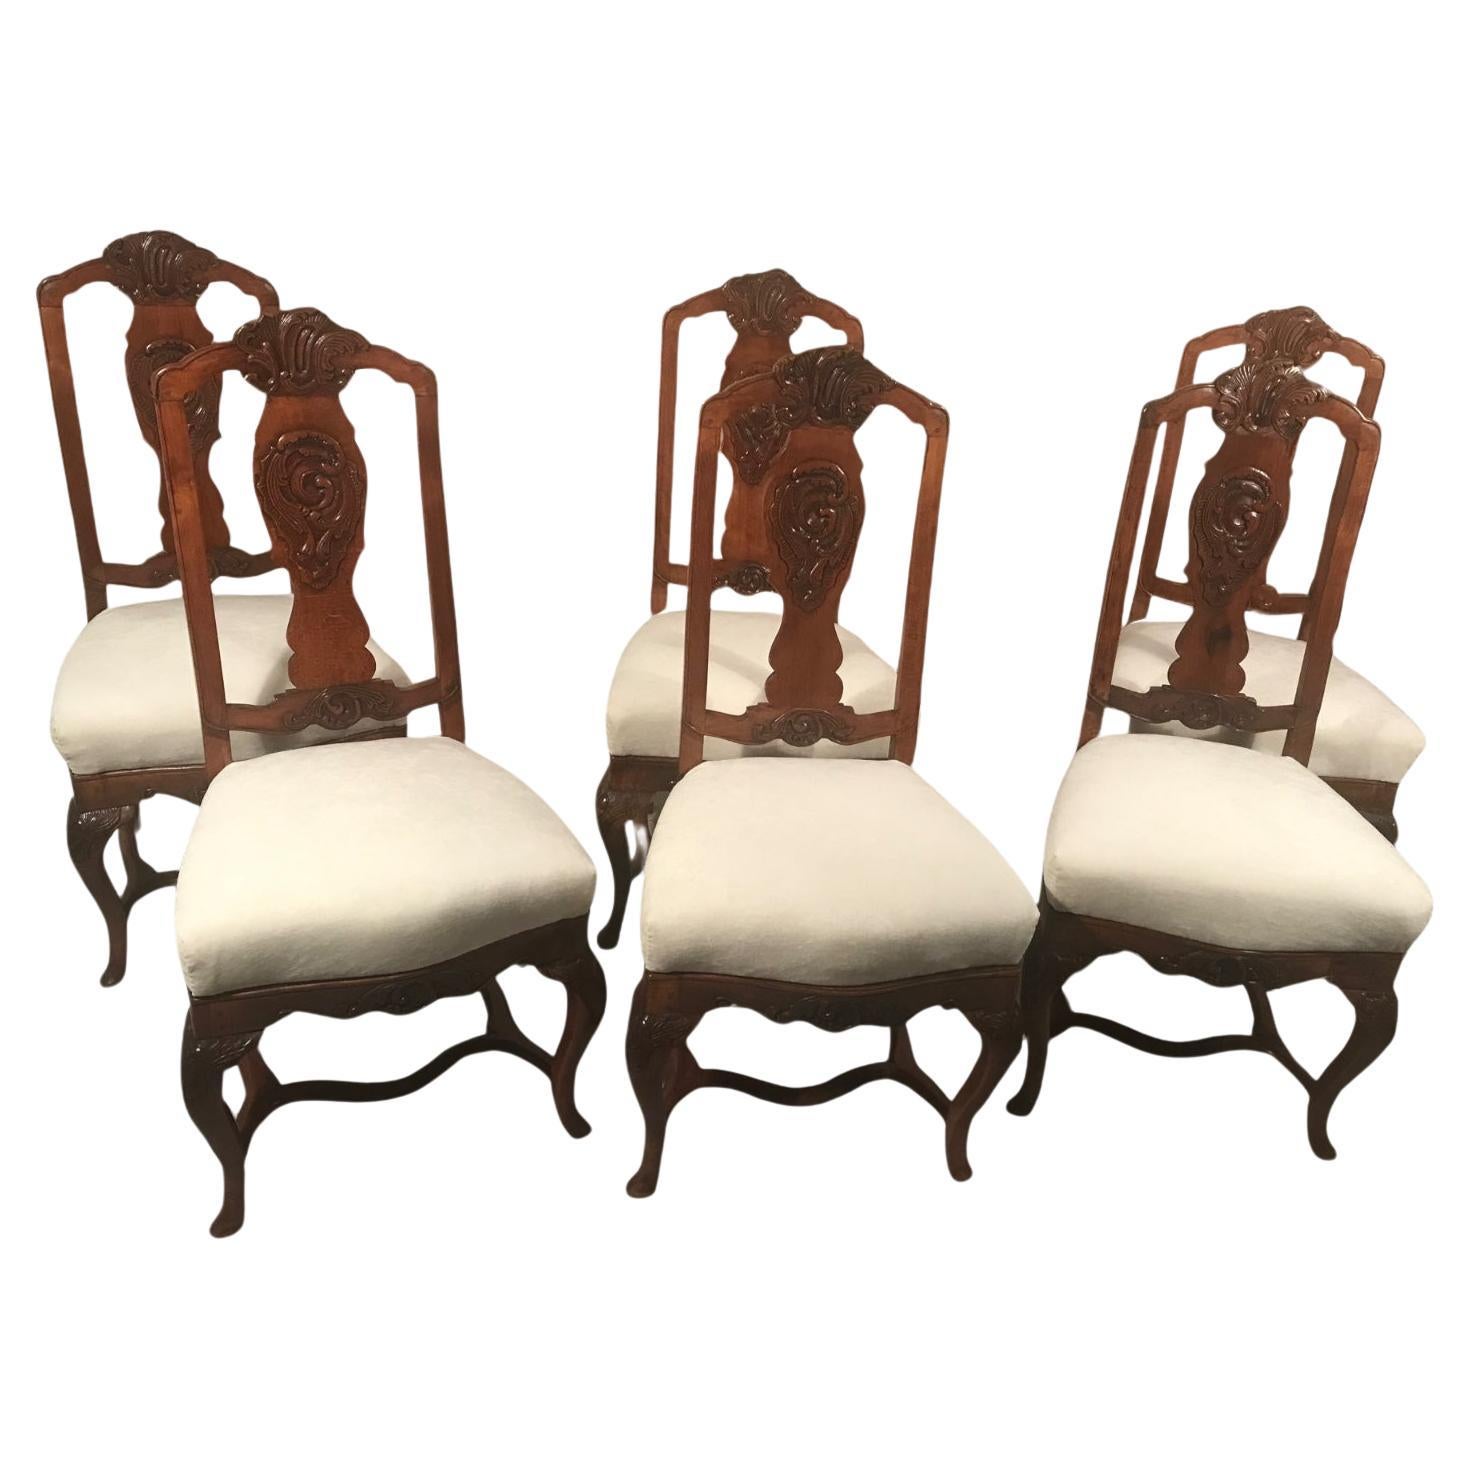 Set of six Original Baroque Chairs, Germany 1750-60 For Sale